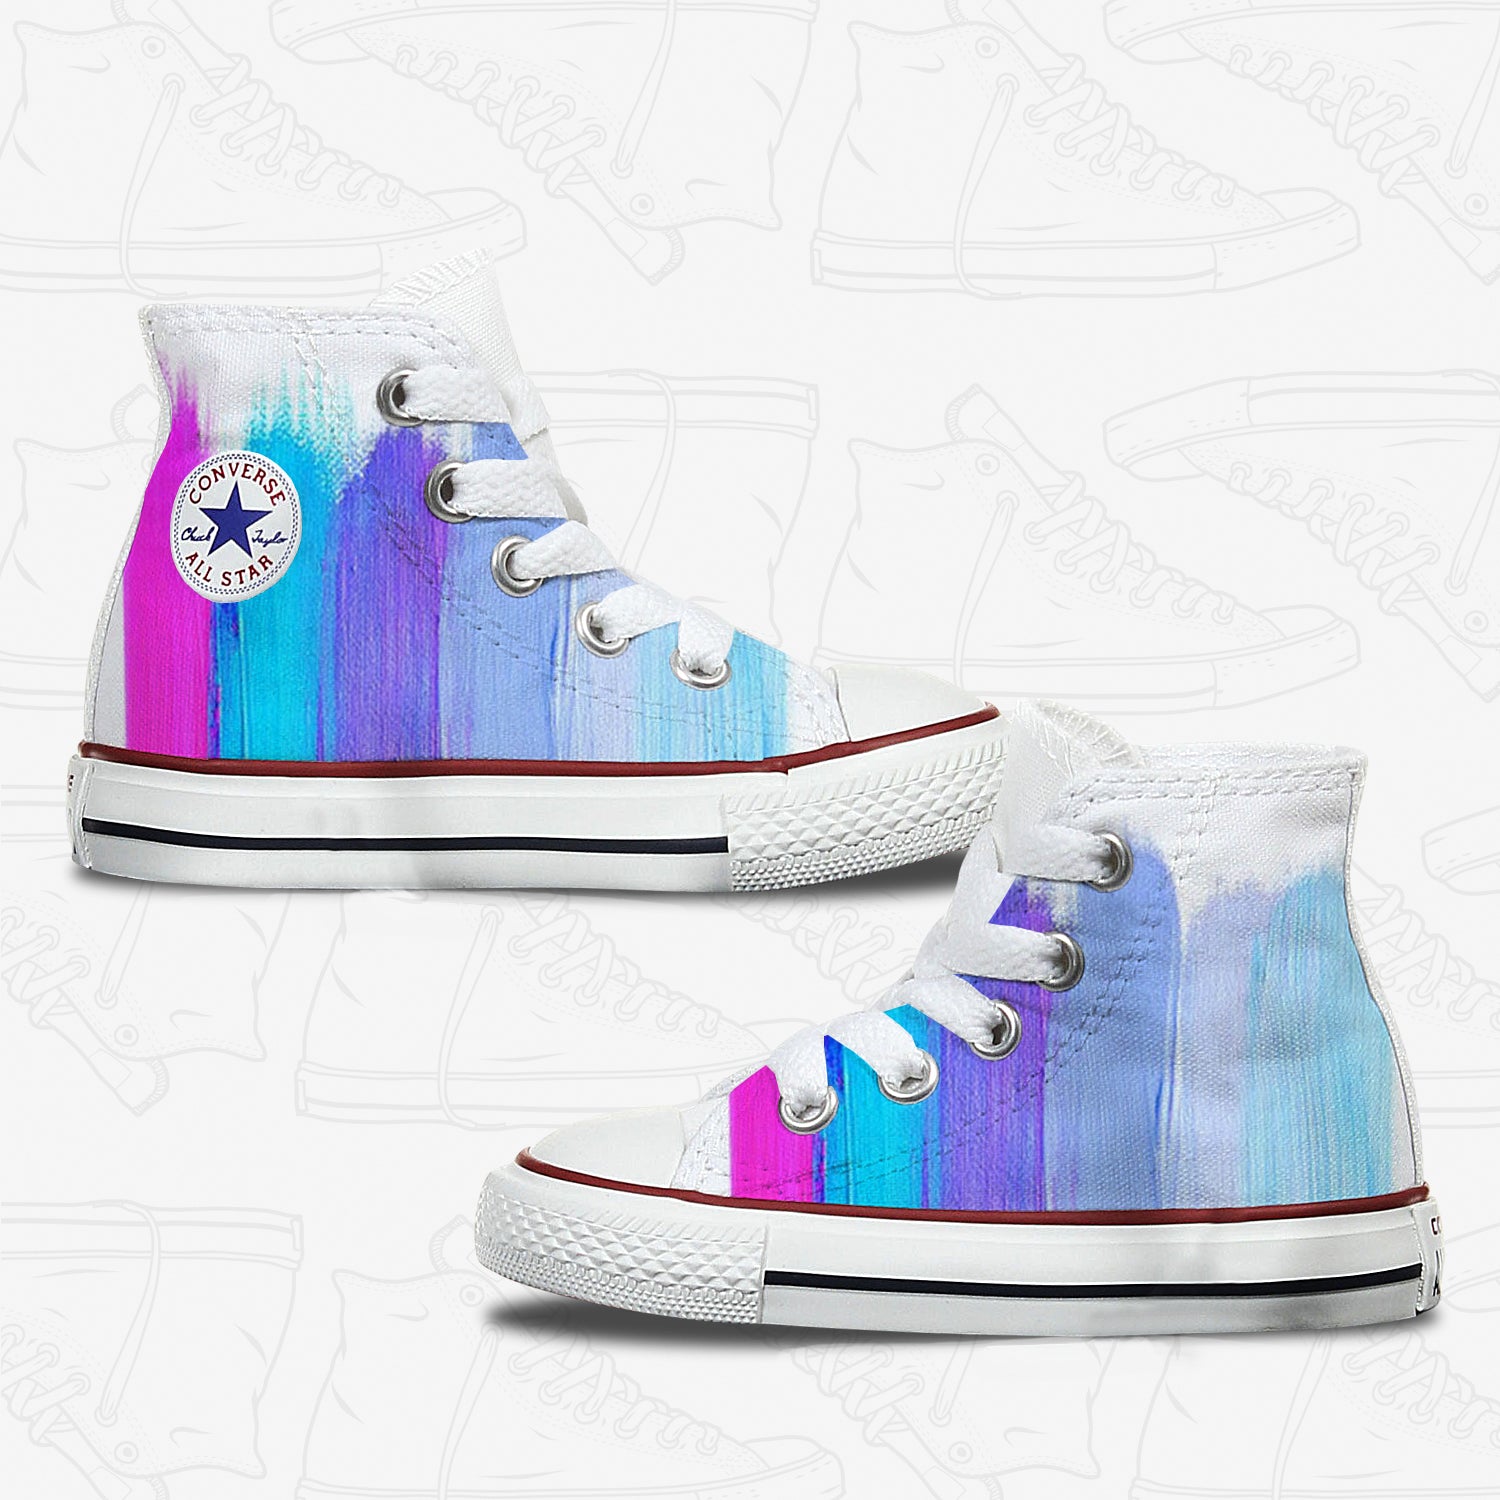 painting converse shoes